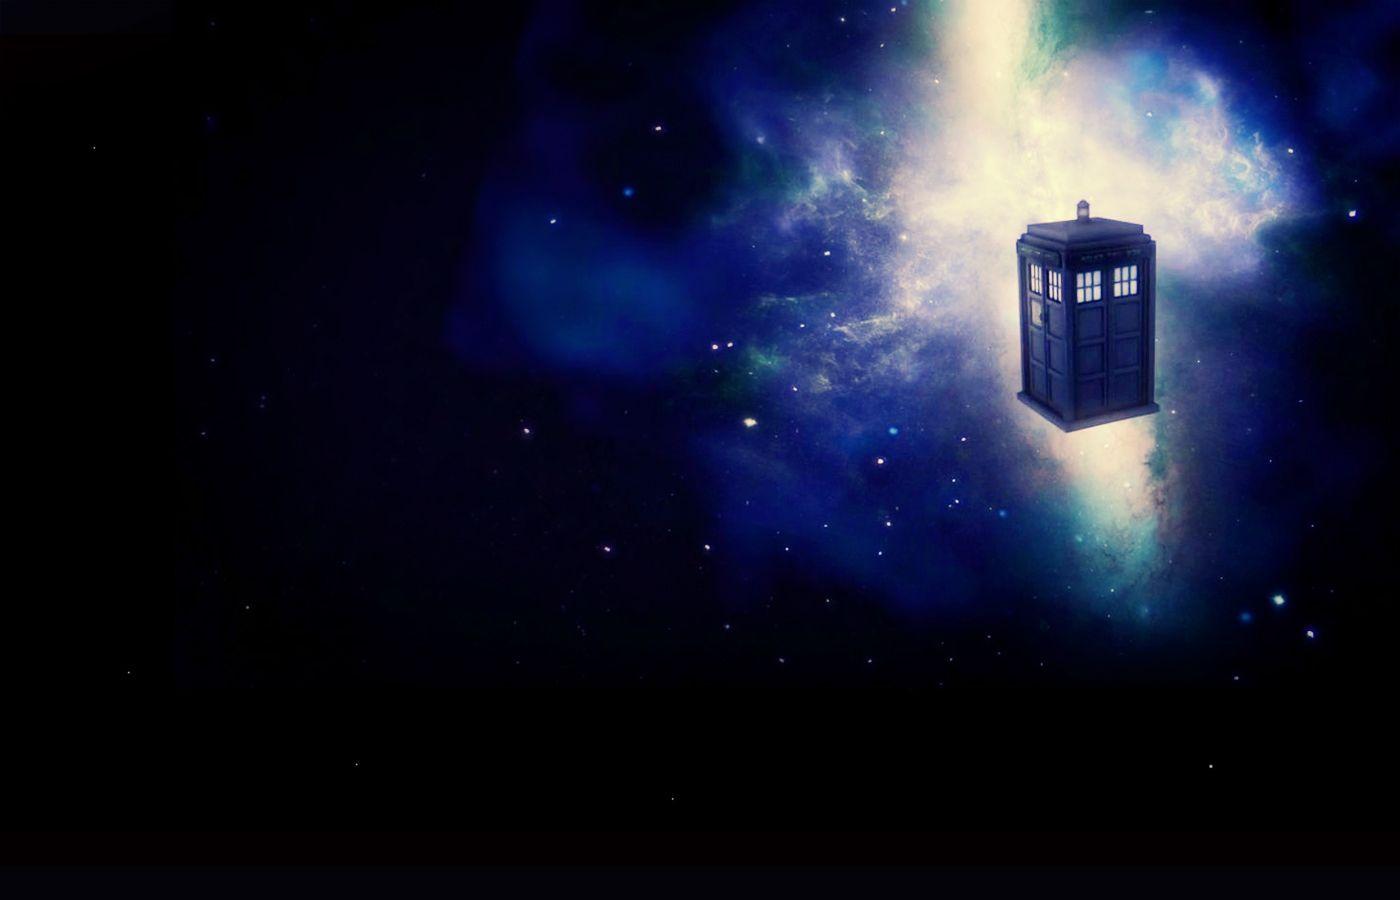 dr.who wallpaper for tablets. Tardis Doctor Who Abstract HD